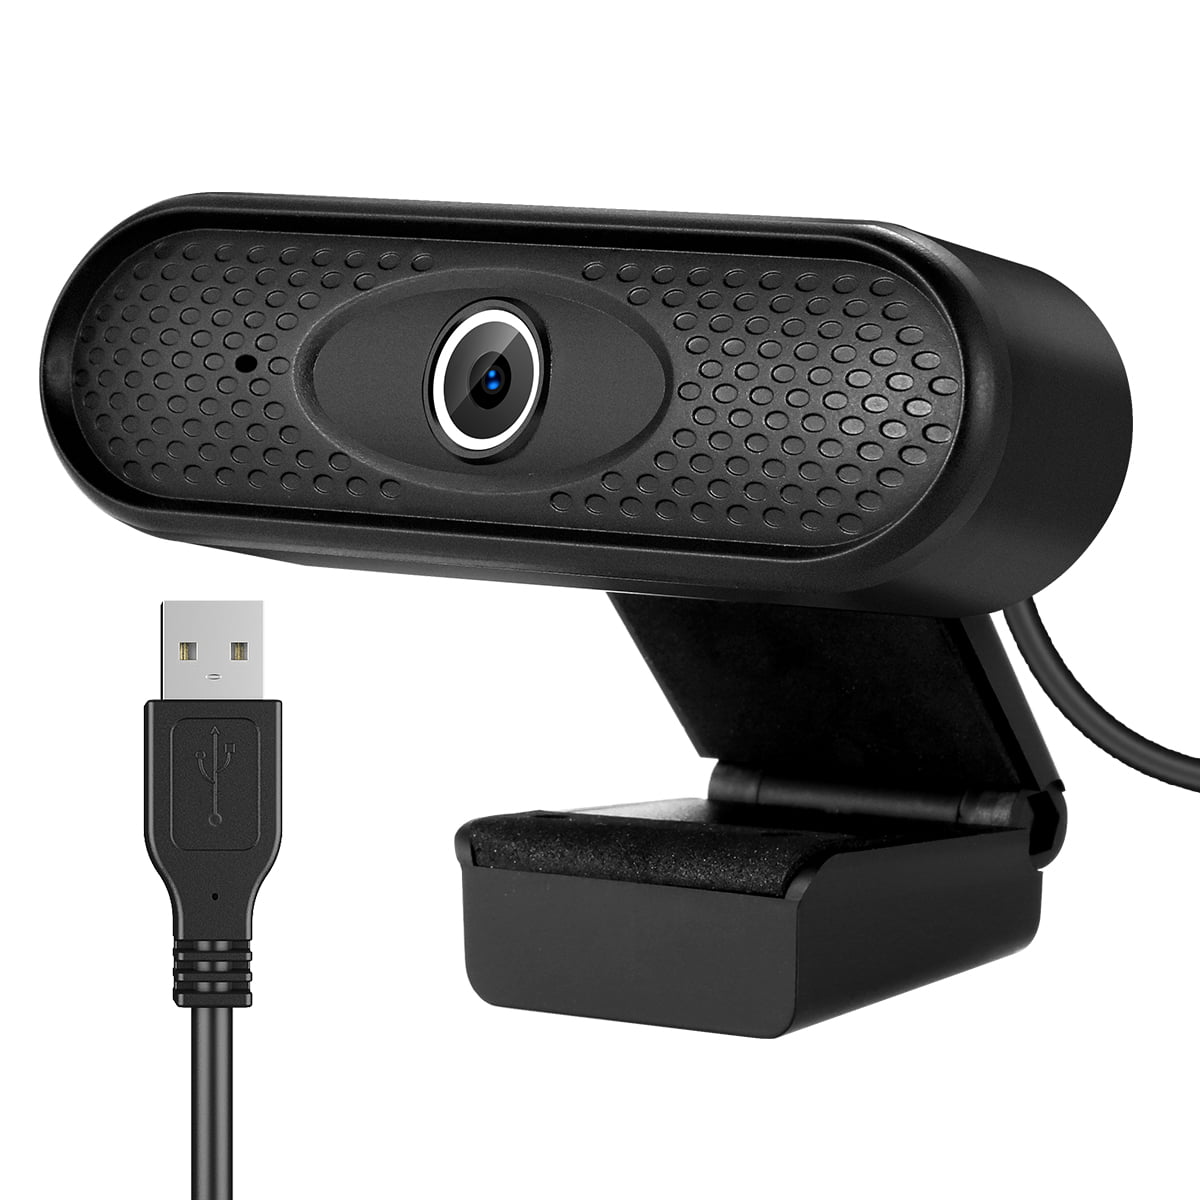 Fest Styrke Muligt 1080P HD Web Camera PC Computer USB Driver-free Webcam with  Noise-cancelling Mic for Teleconferencing Live Streaming | Walmart Canada